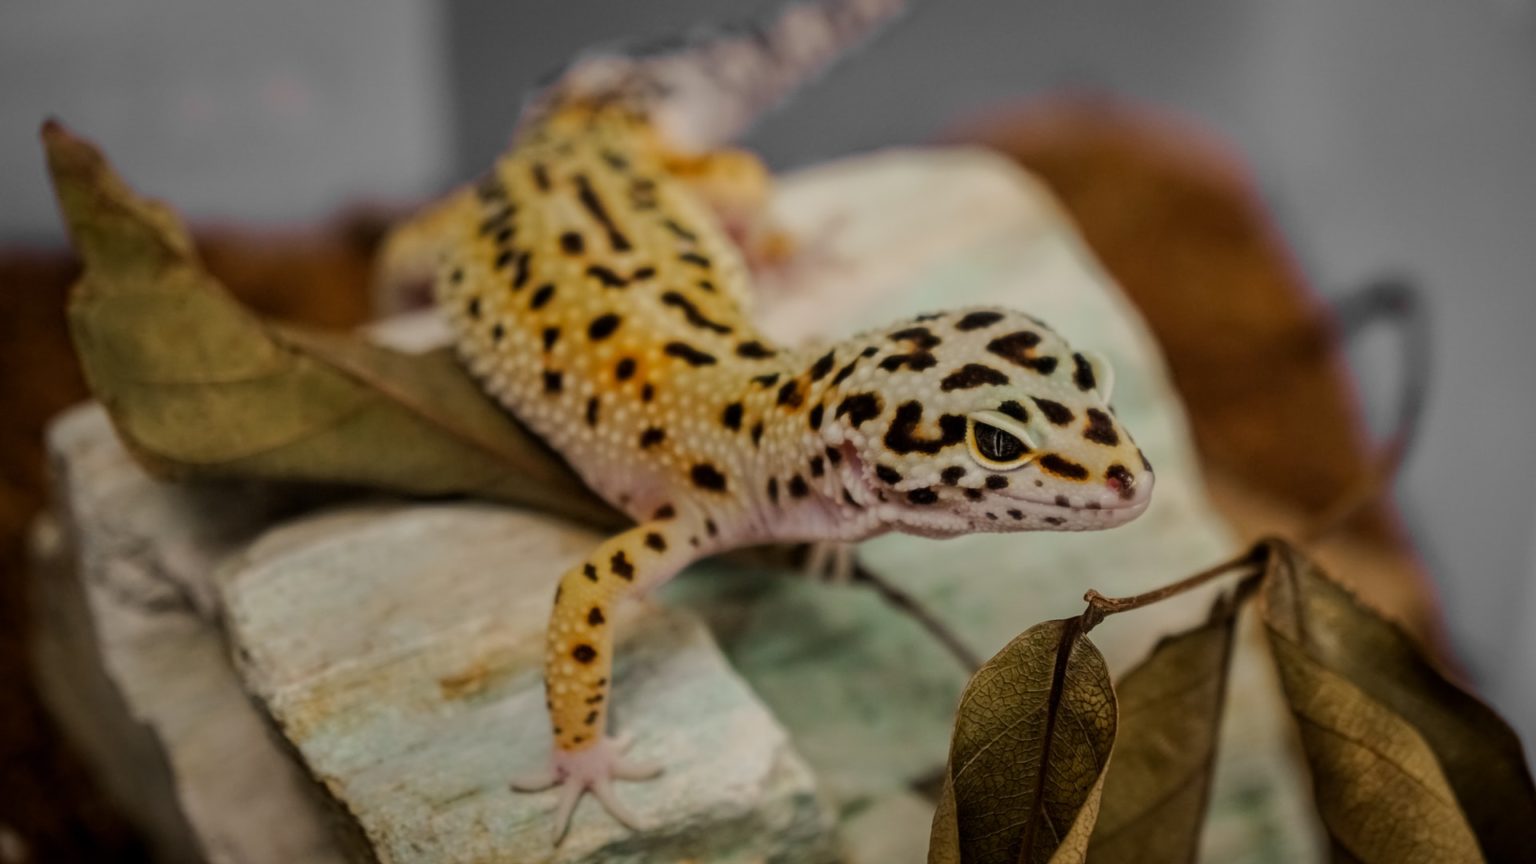 Top Five Most Common Types of Pet Lizards | Pets and Animals Tips